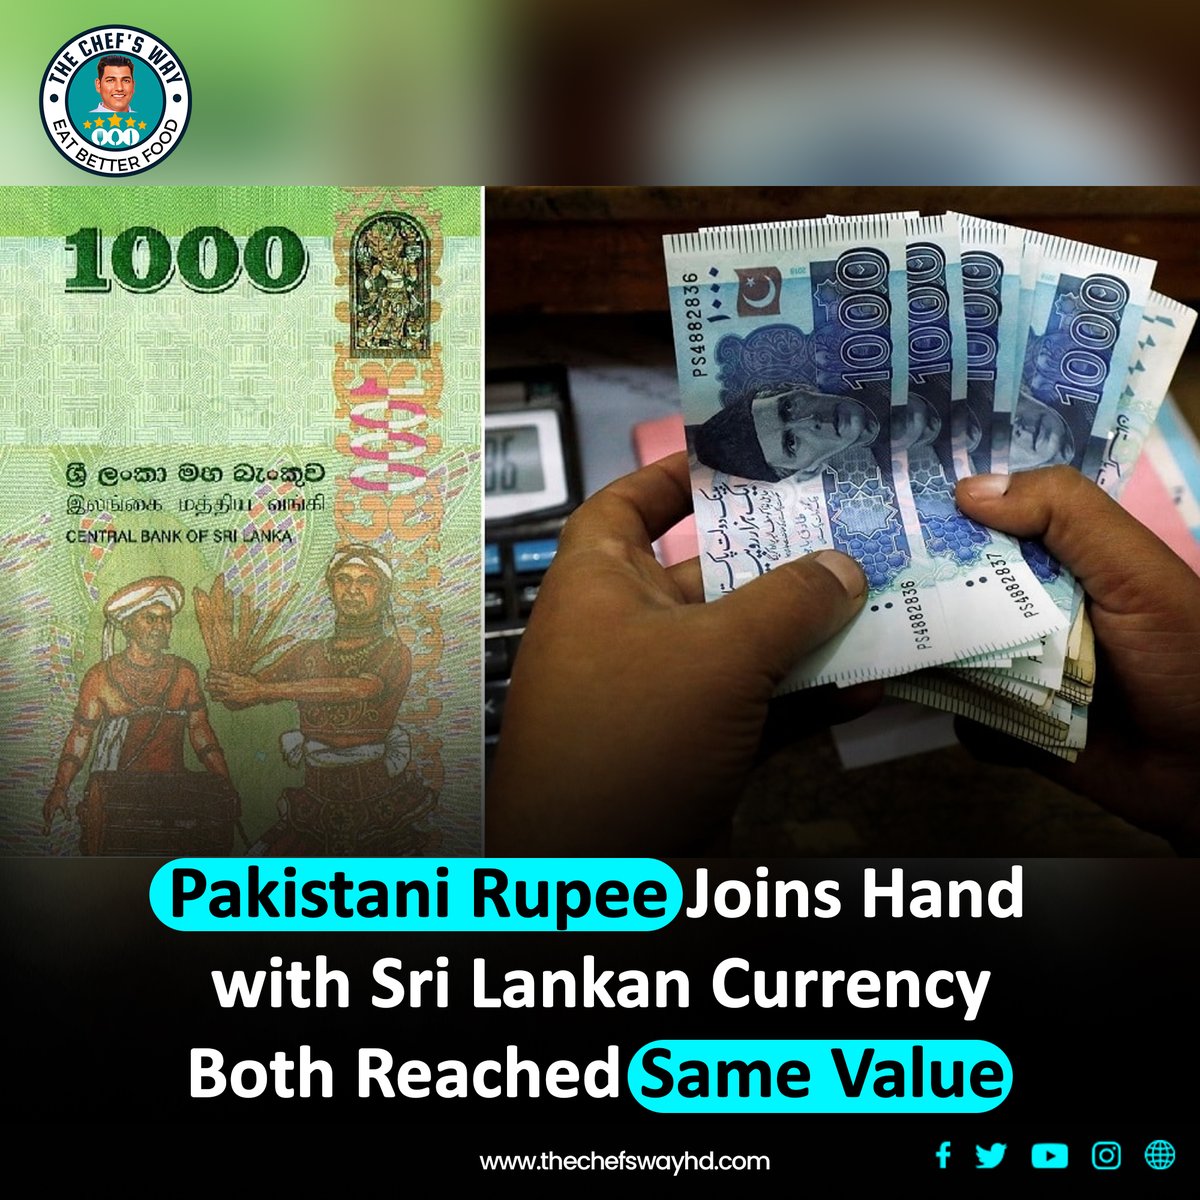 In a surprising turn of events, the Pakistani Rupee (PKR) and the Sri  Lankan Rupee (LKR) have almost reached an equivalent value.
#pak #currency #devalue #deflation #srilankan #markets #highlight #risk #thechefsway